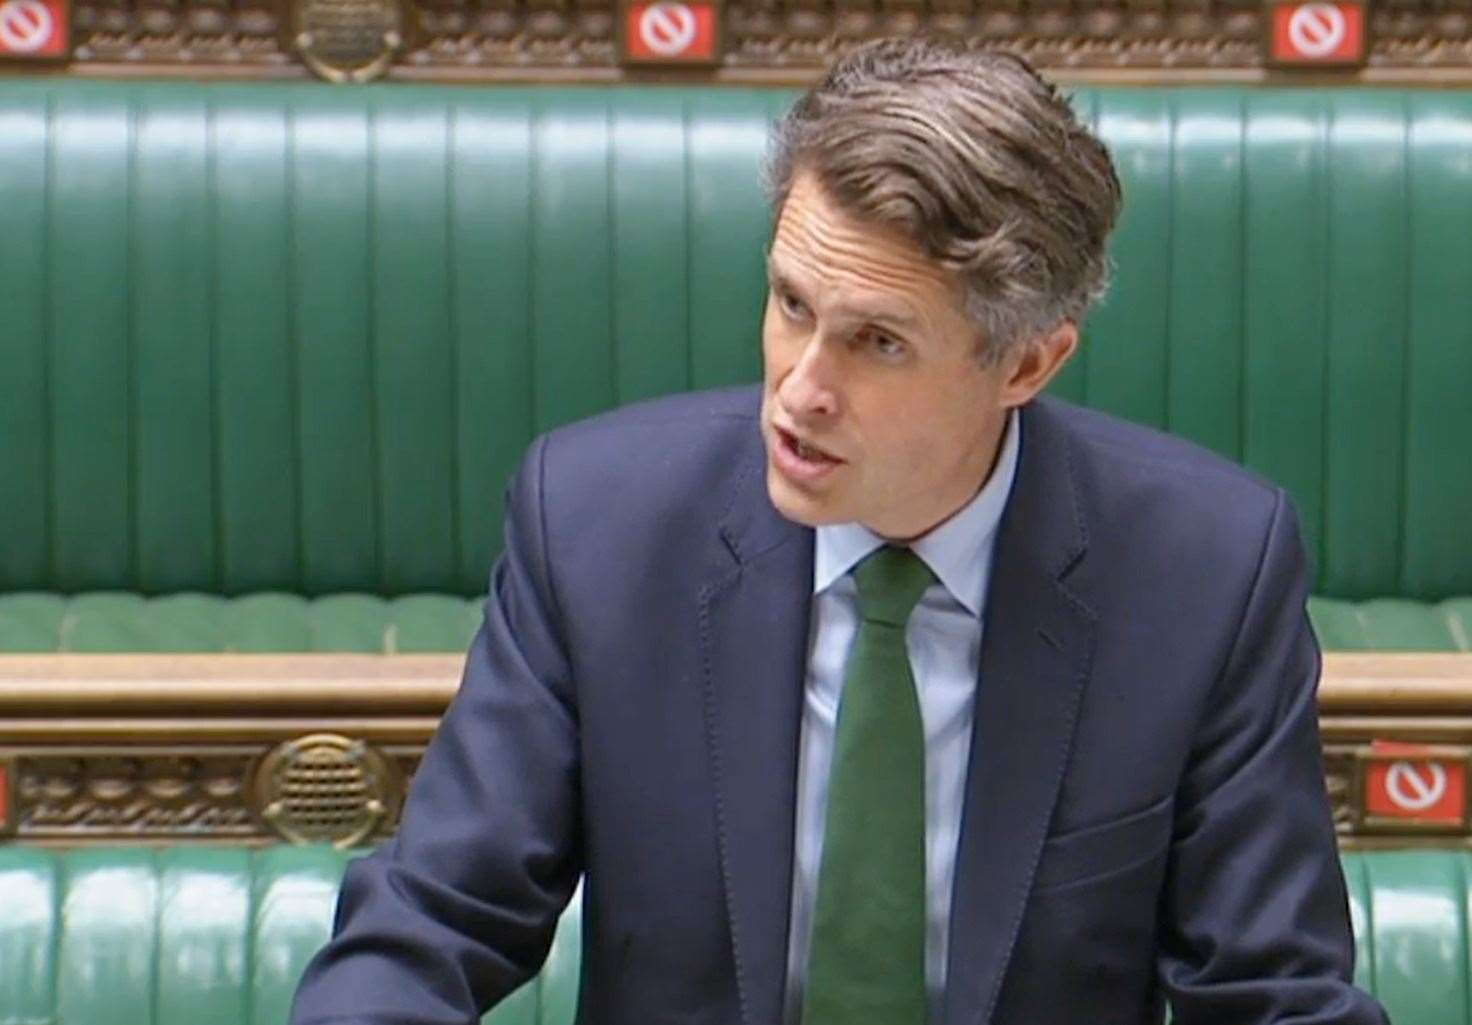 Education Secretary Gavin Williamson speaking to MPs in the House of Commons (House of Commons/PA)